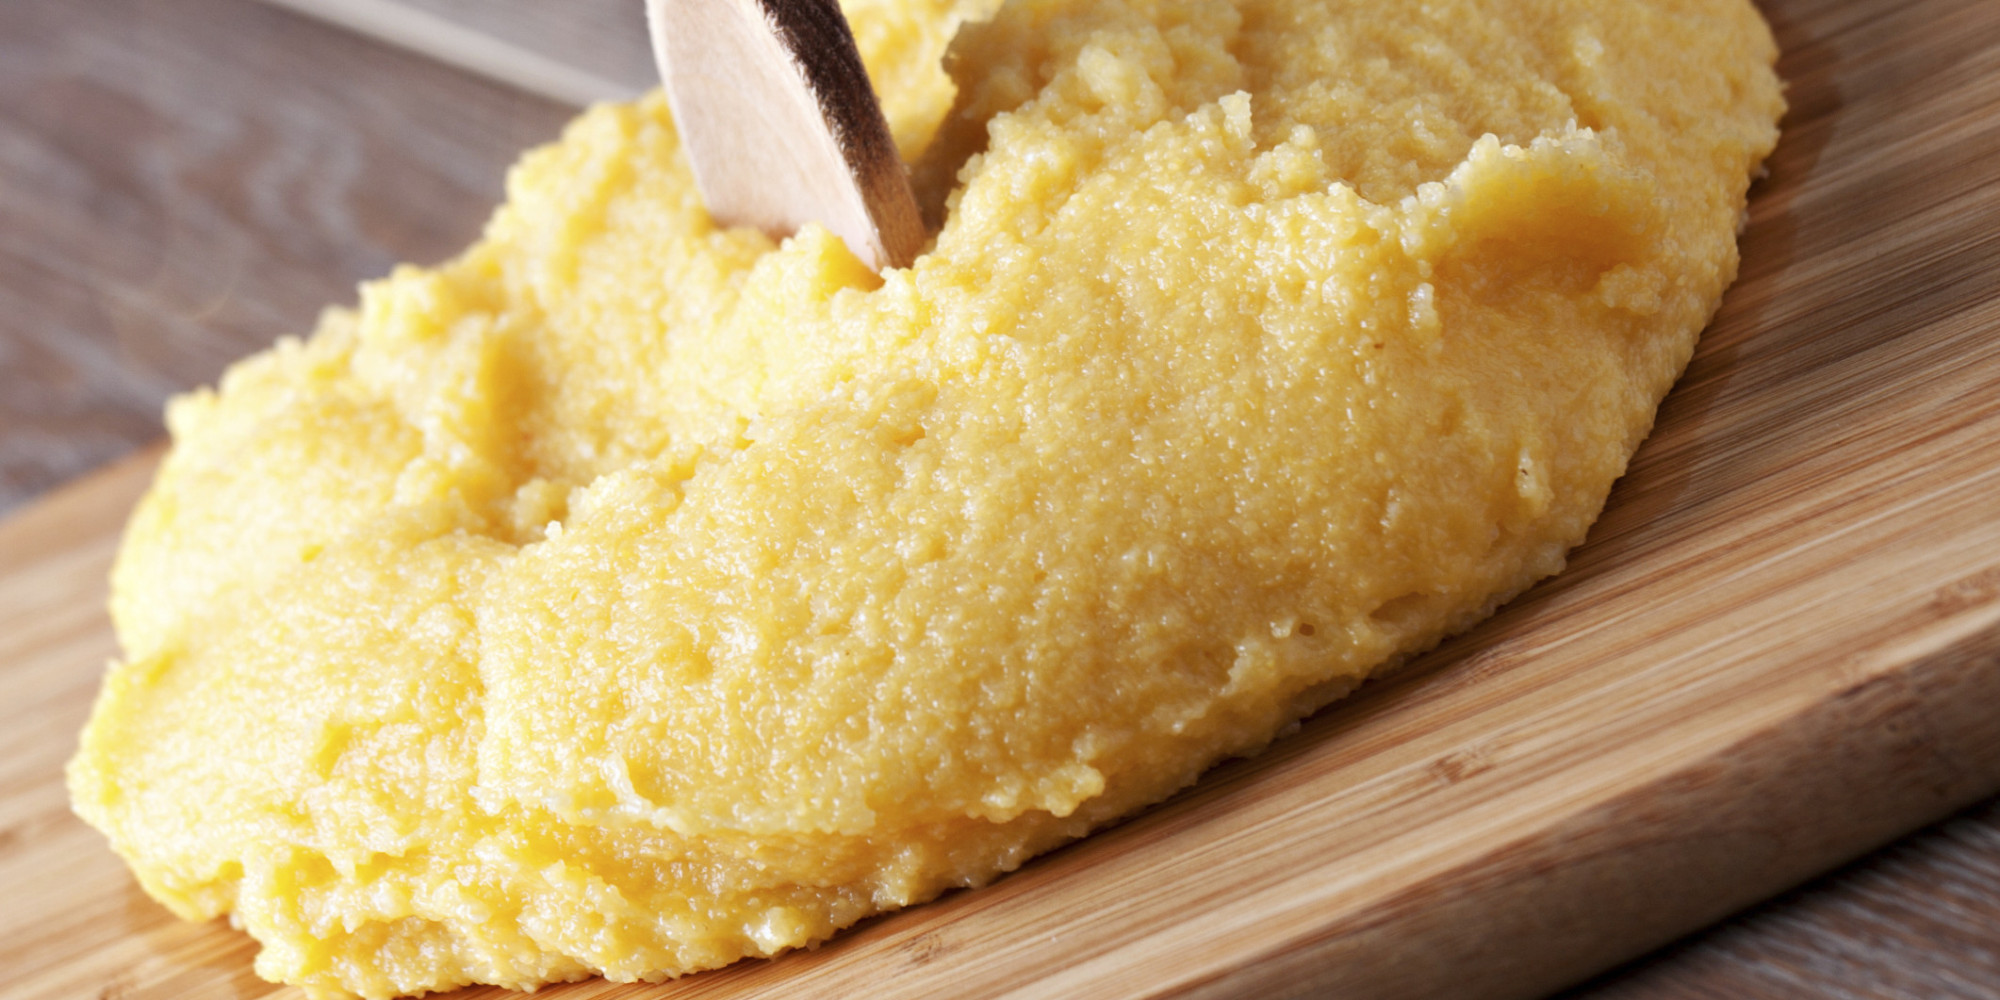 So What Exactly IS Polenta, Anyway? | HuffPost